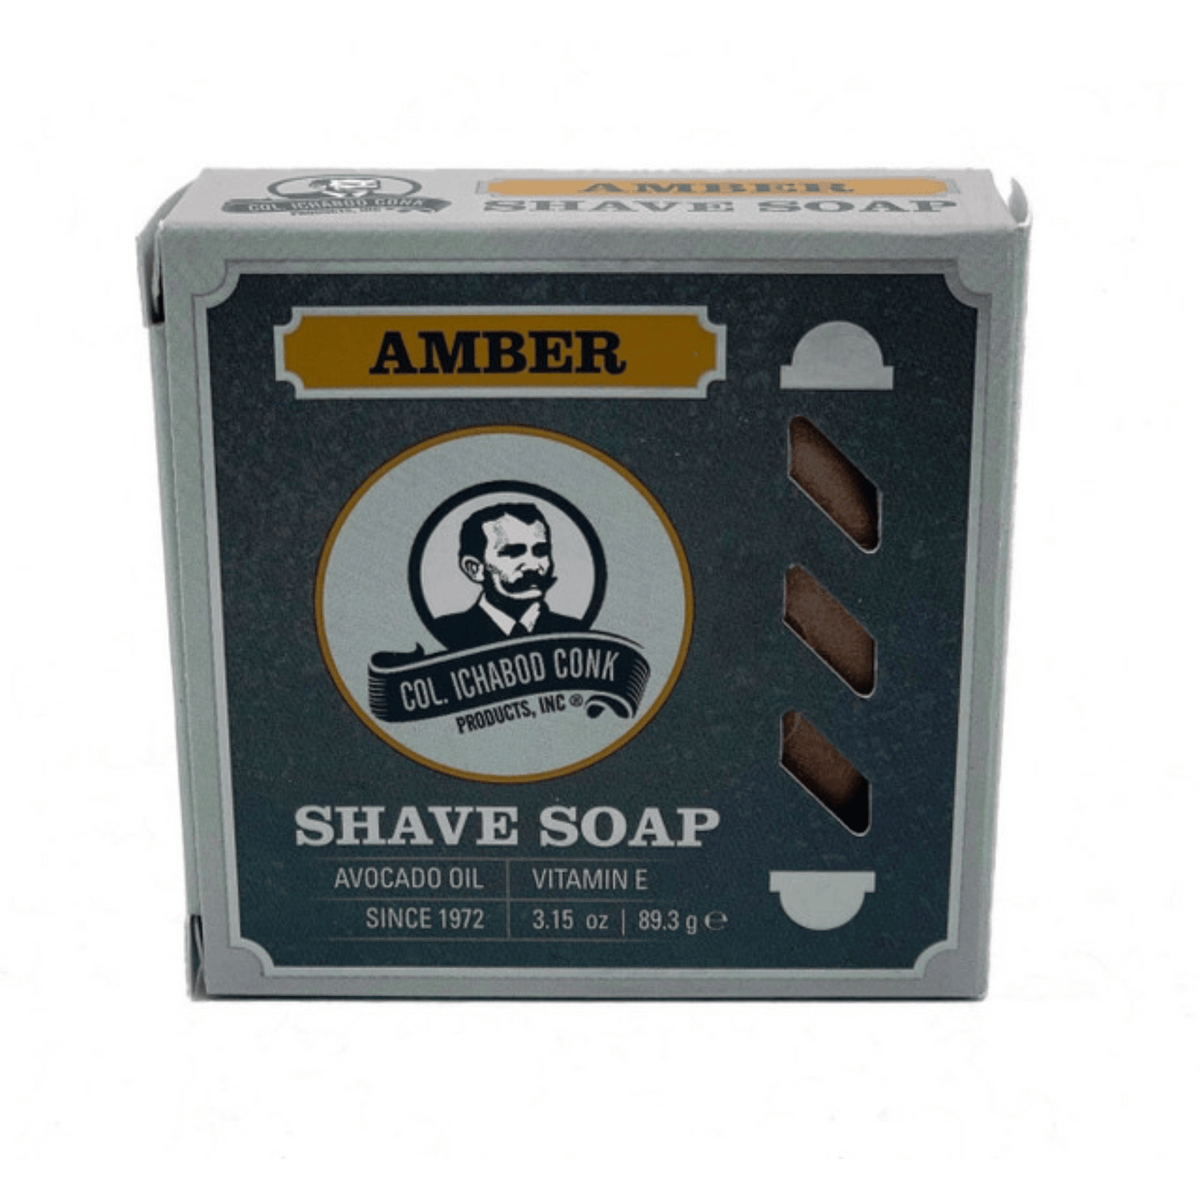 Primary Image of Amber Glycerin Shave Soap